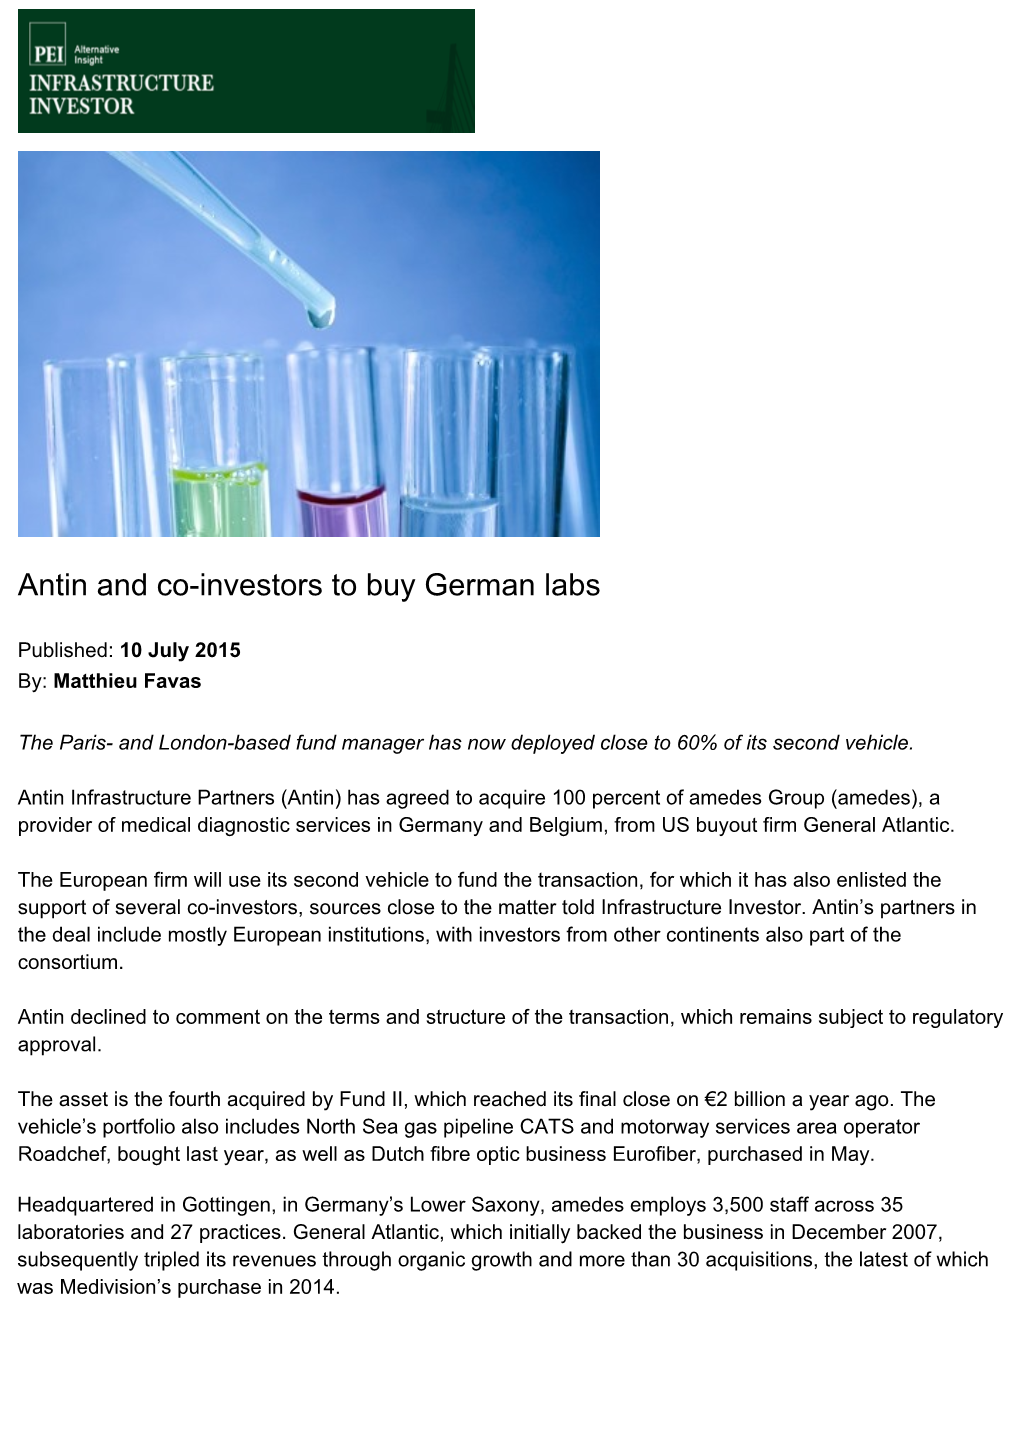 Antin and Co-Investors to Buy German Labs